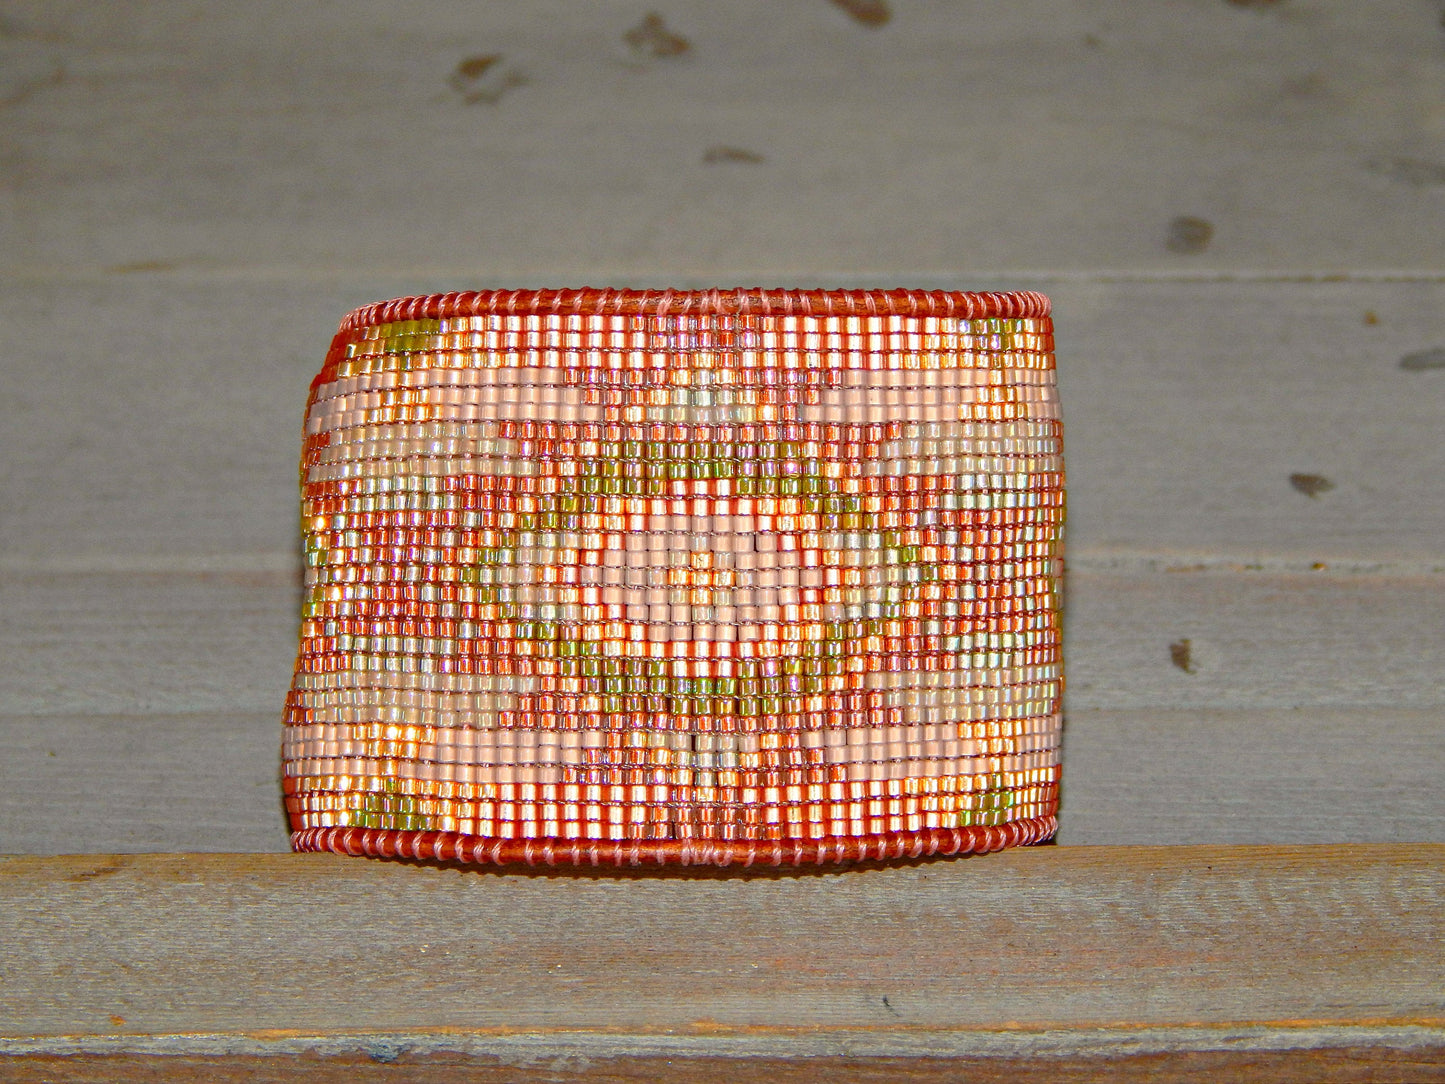 Blush and Copper Bead Loom Woven Wide Cuff, Native American Loom Bracelet